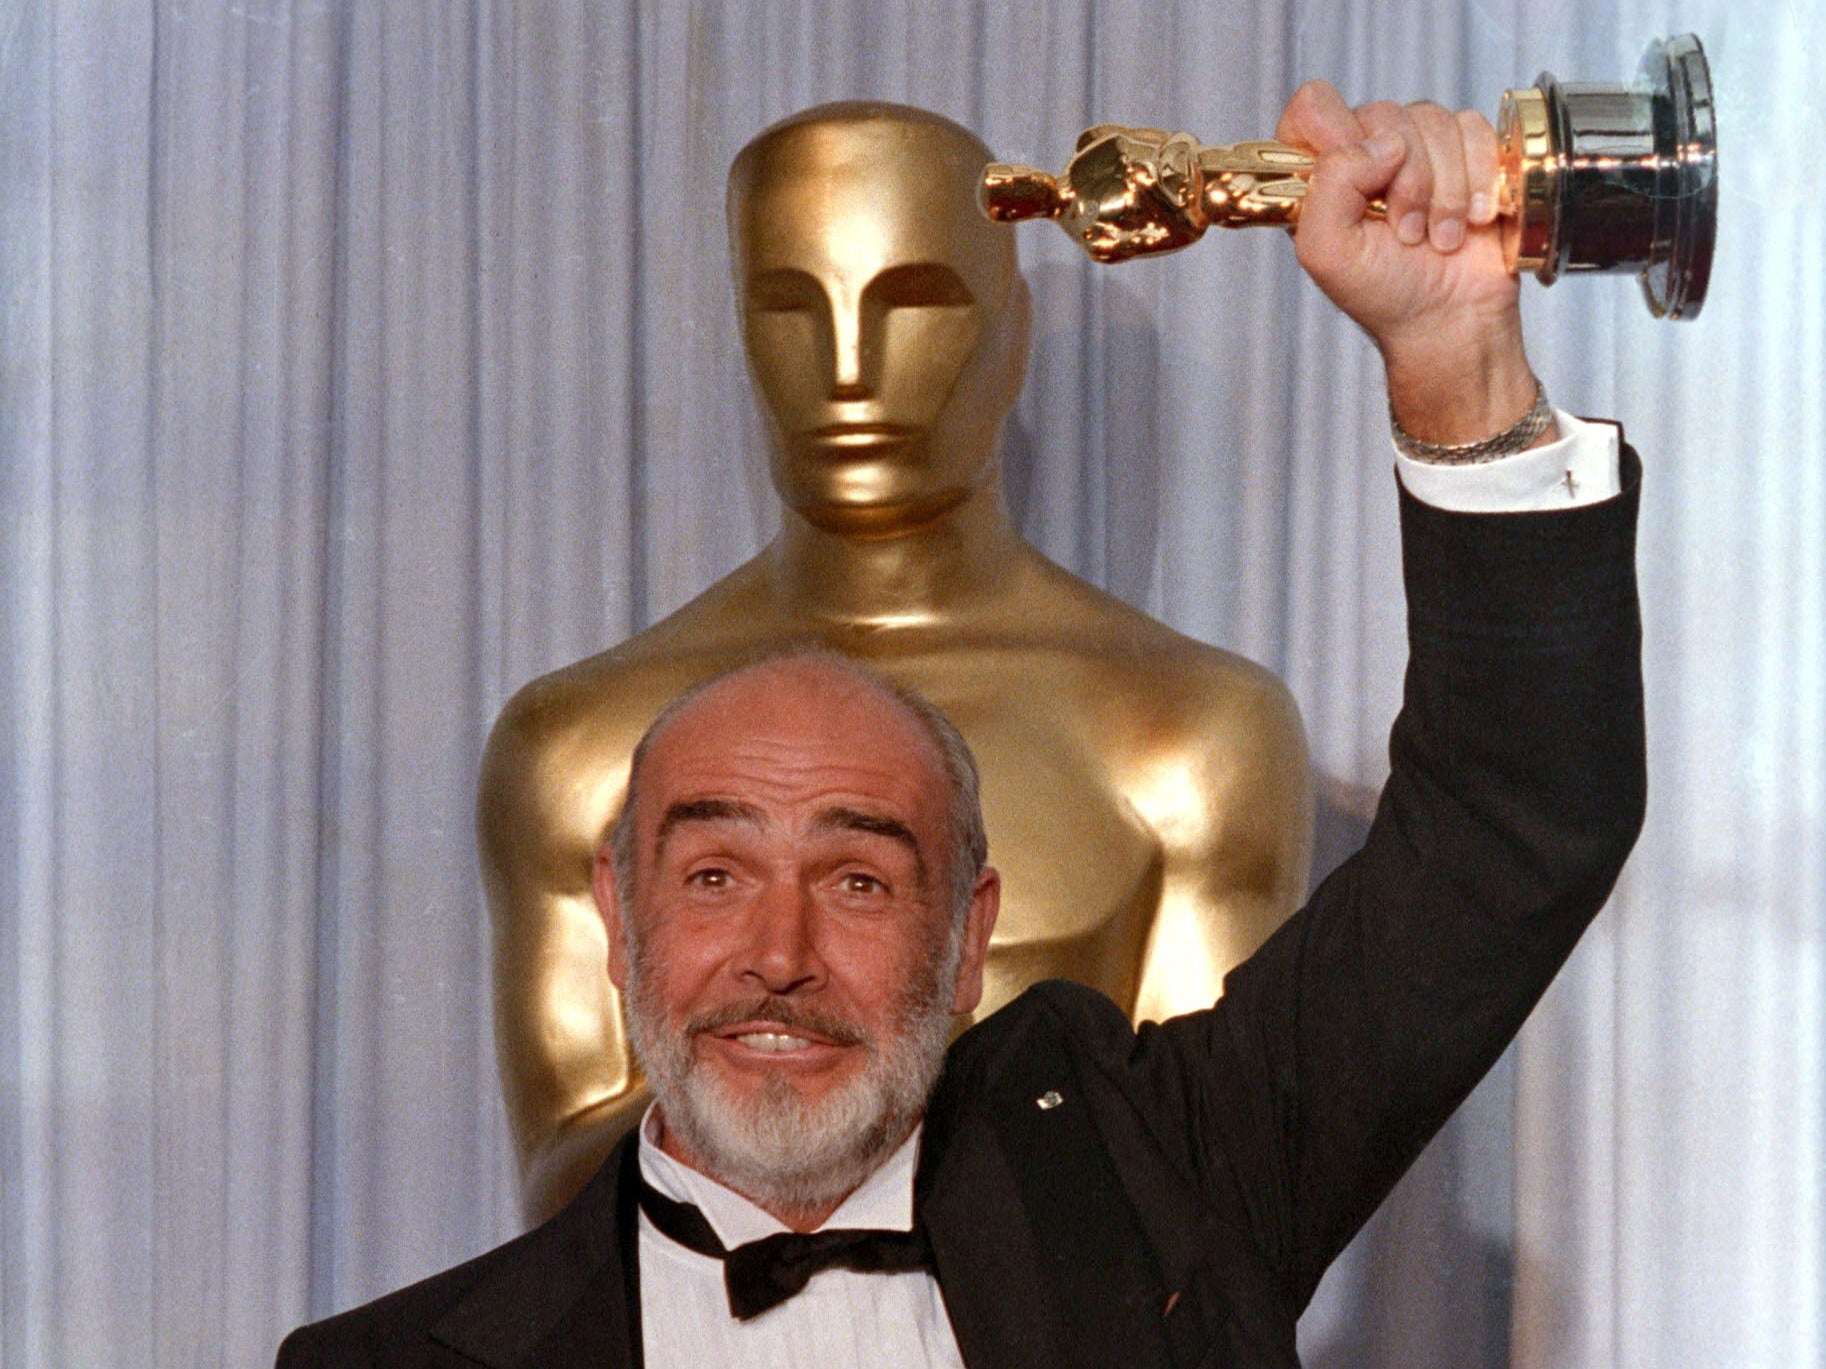 Connery received the Academy Award for Best Supporting Actor for his performance in The Untouchables